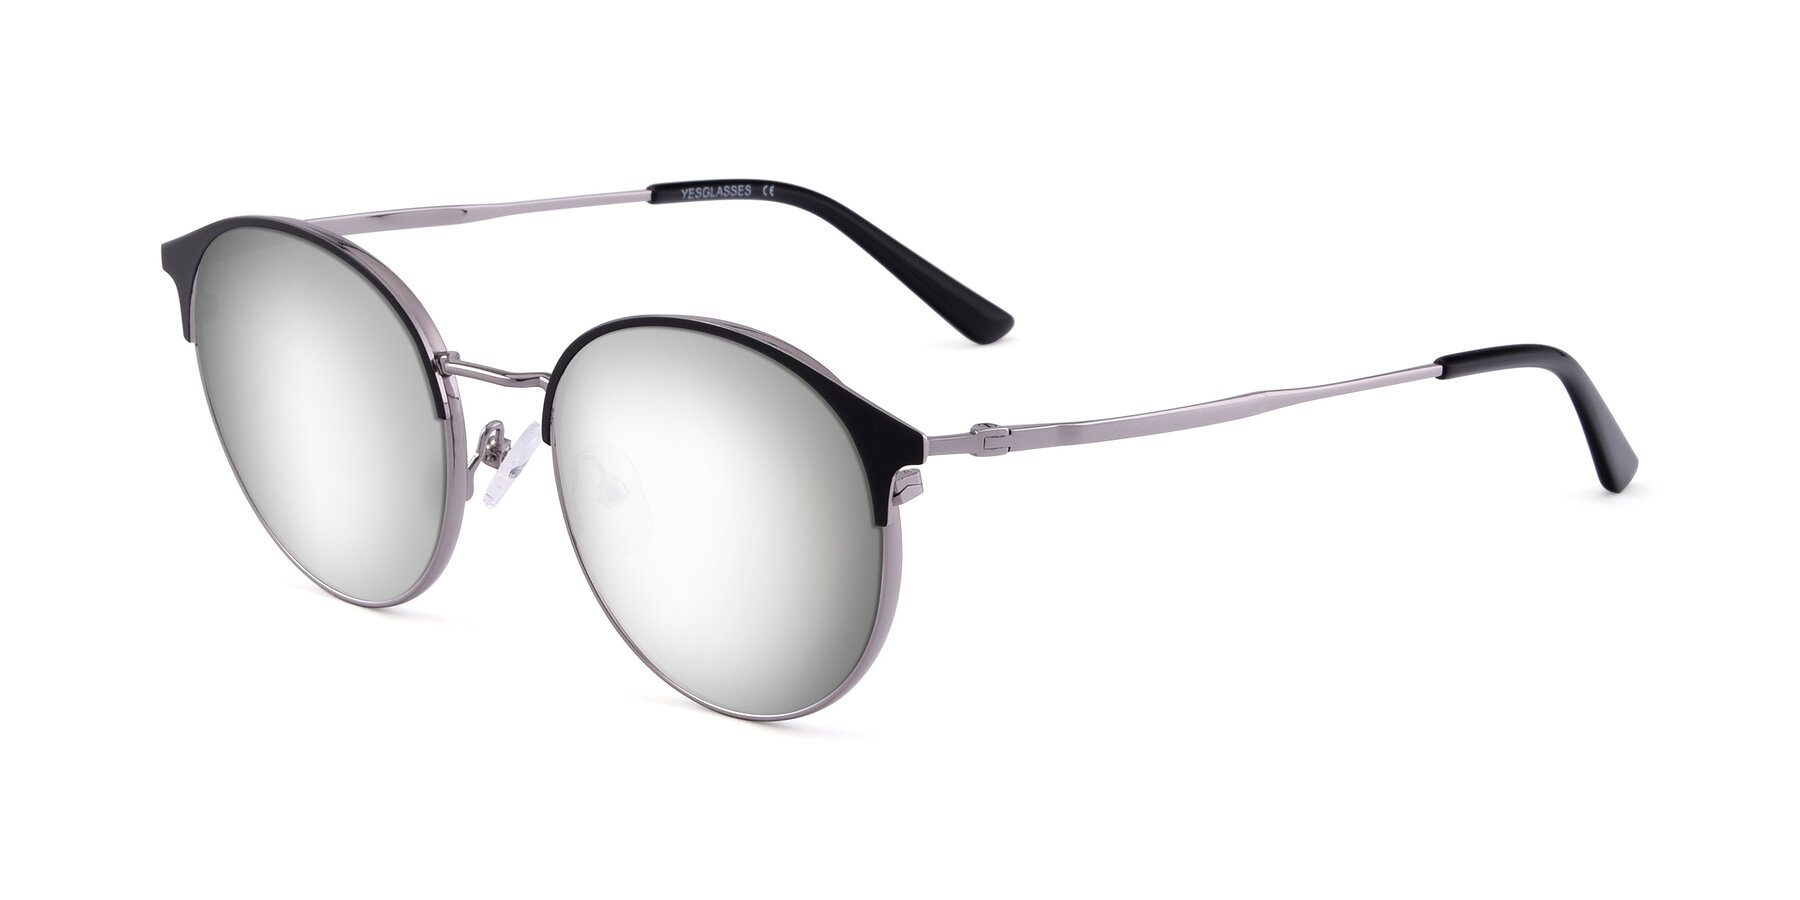 Angle of Berkley in Black-Gunmetal with Silver Mirrored Lenses